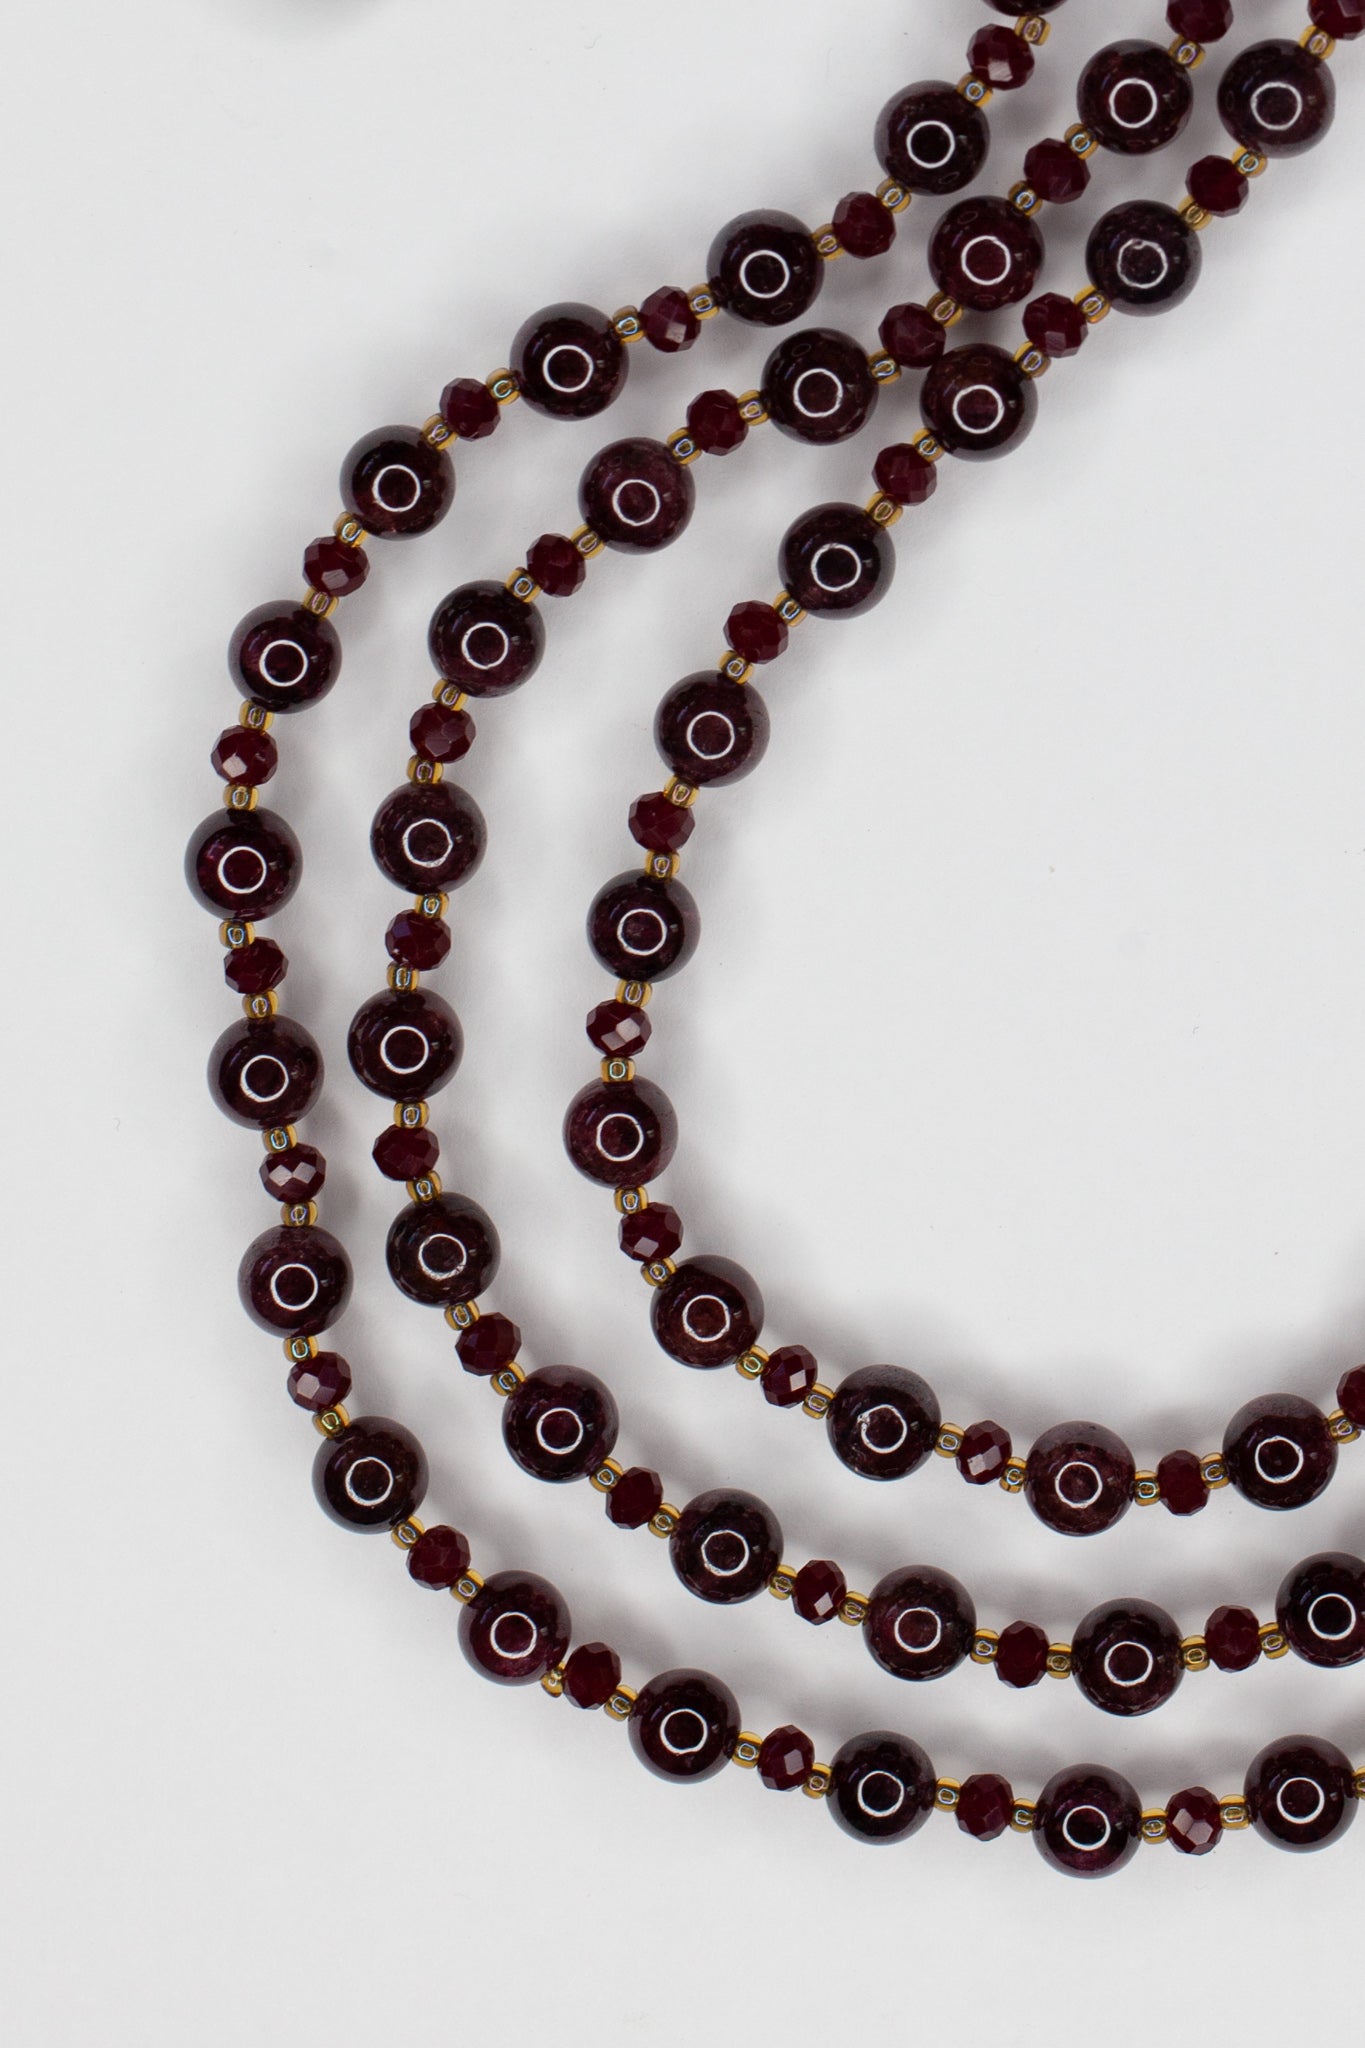 58" Extra Long Wraparound Dark Red Garnet Necklace with Crystal Beads